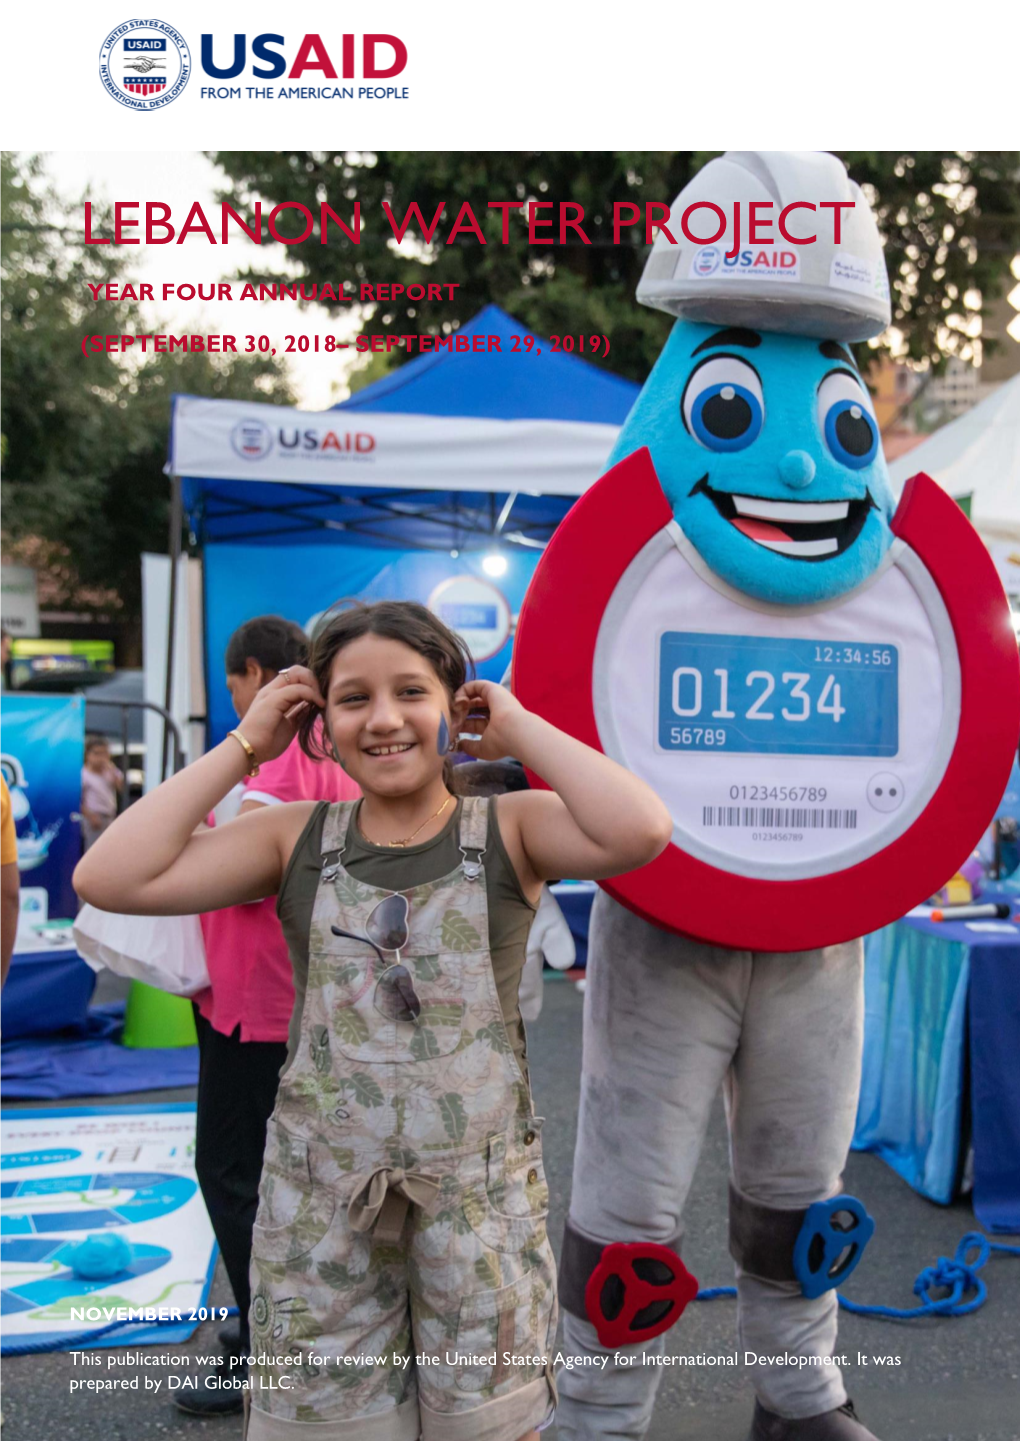 ` 1 Lebanon Water Project Year Four Annual Report